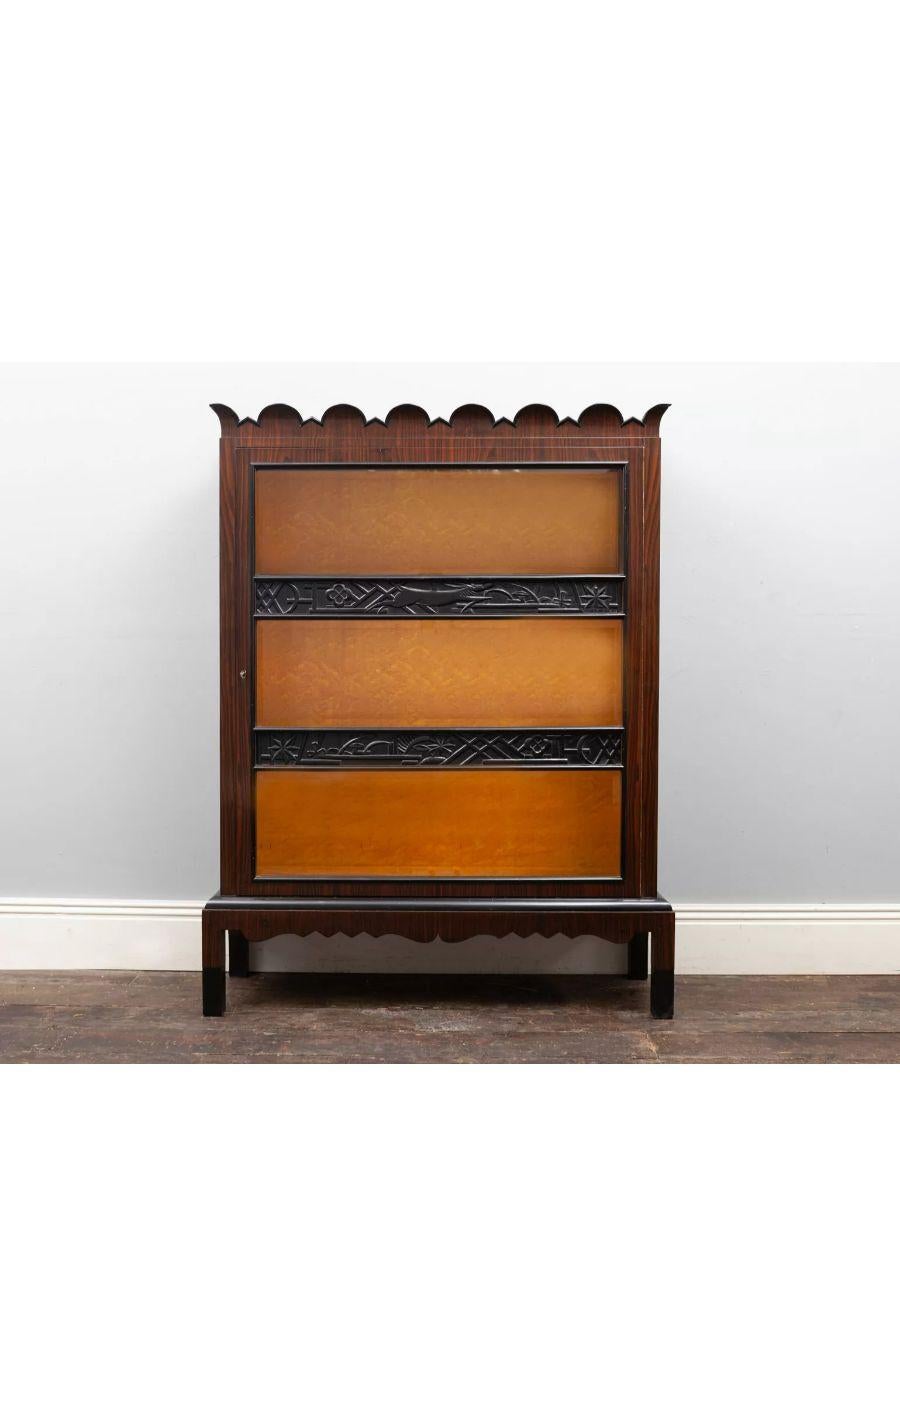 European Early 20th Century Rare Coromantel, Ebony and Satinwood Display Cabinet For Sale